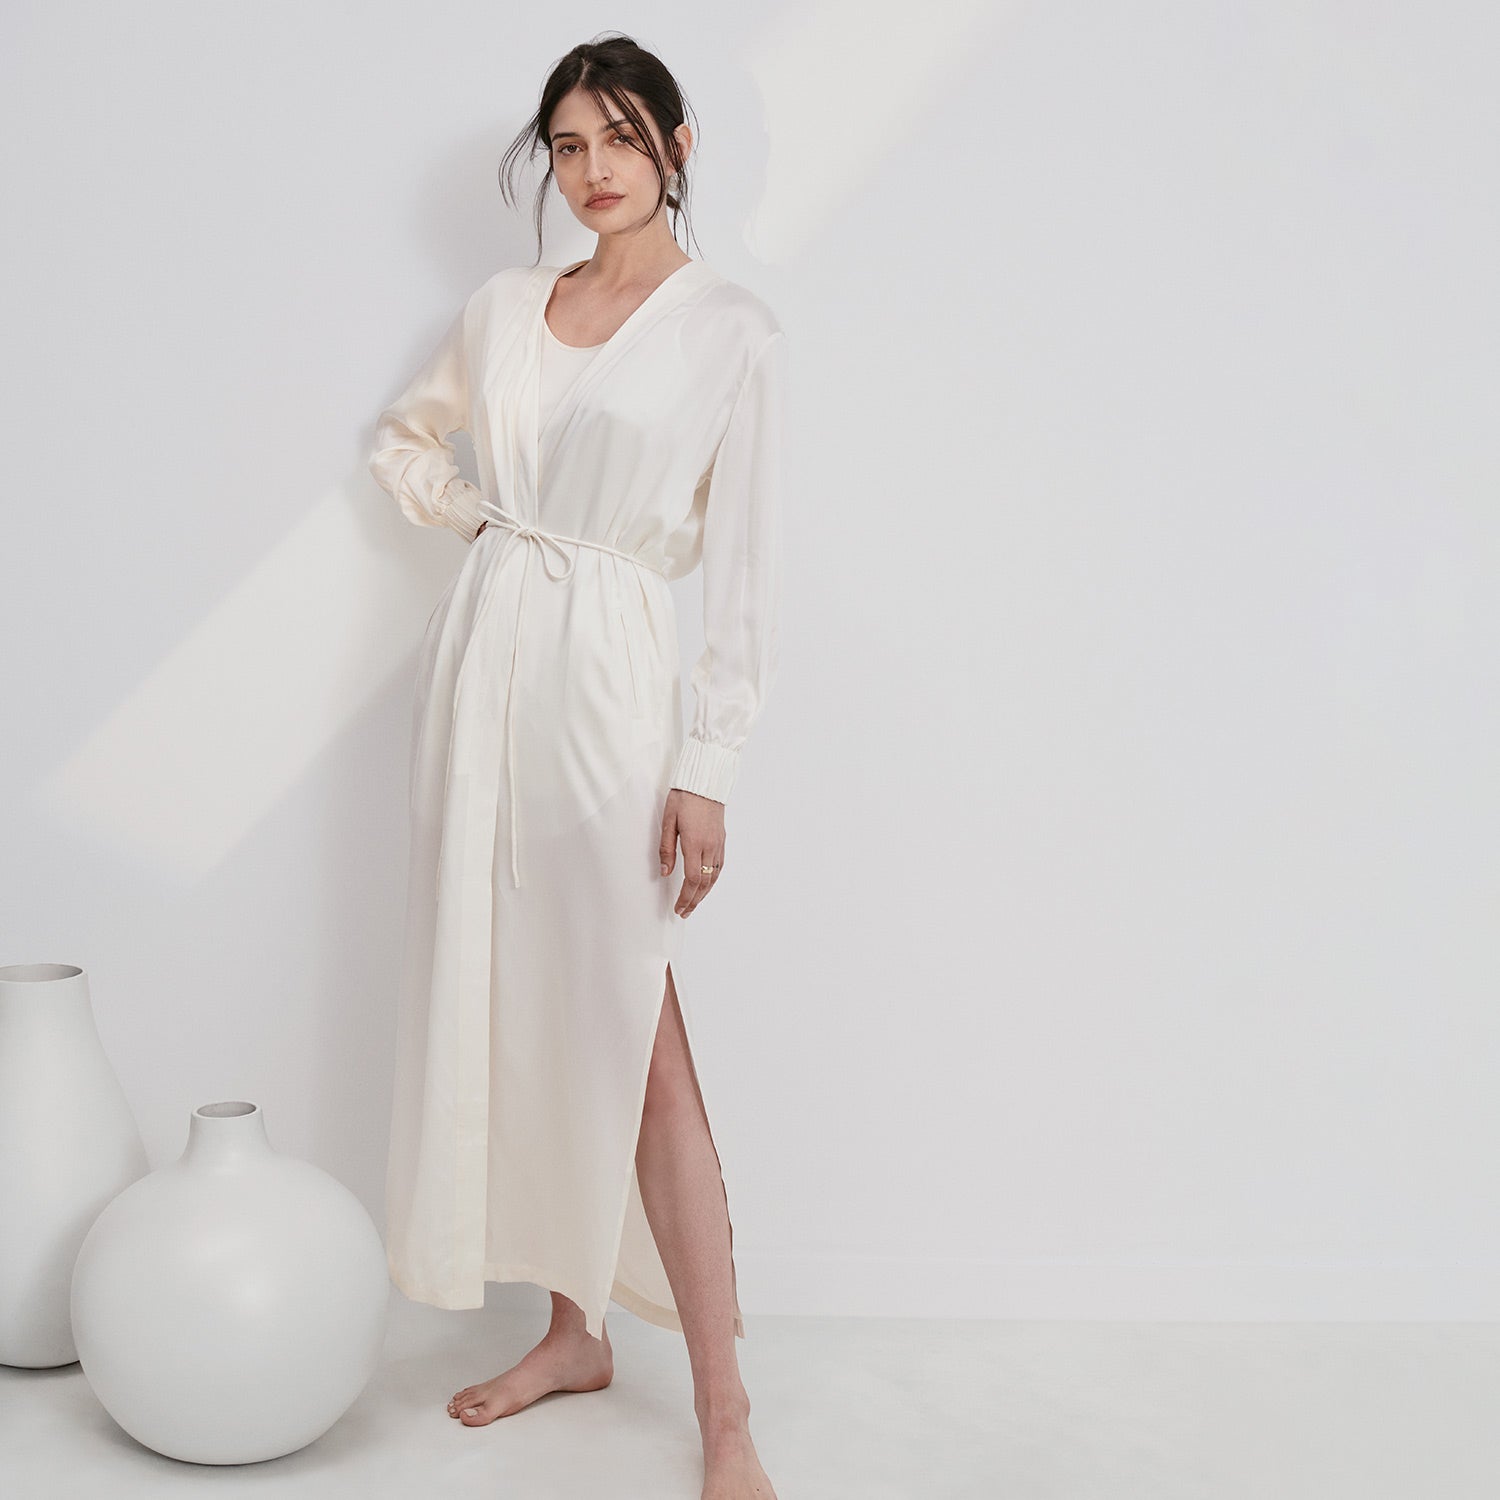 Petite Plume™ Women's Silk Robe With Feathers For Women